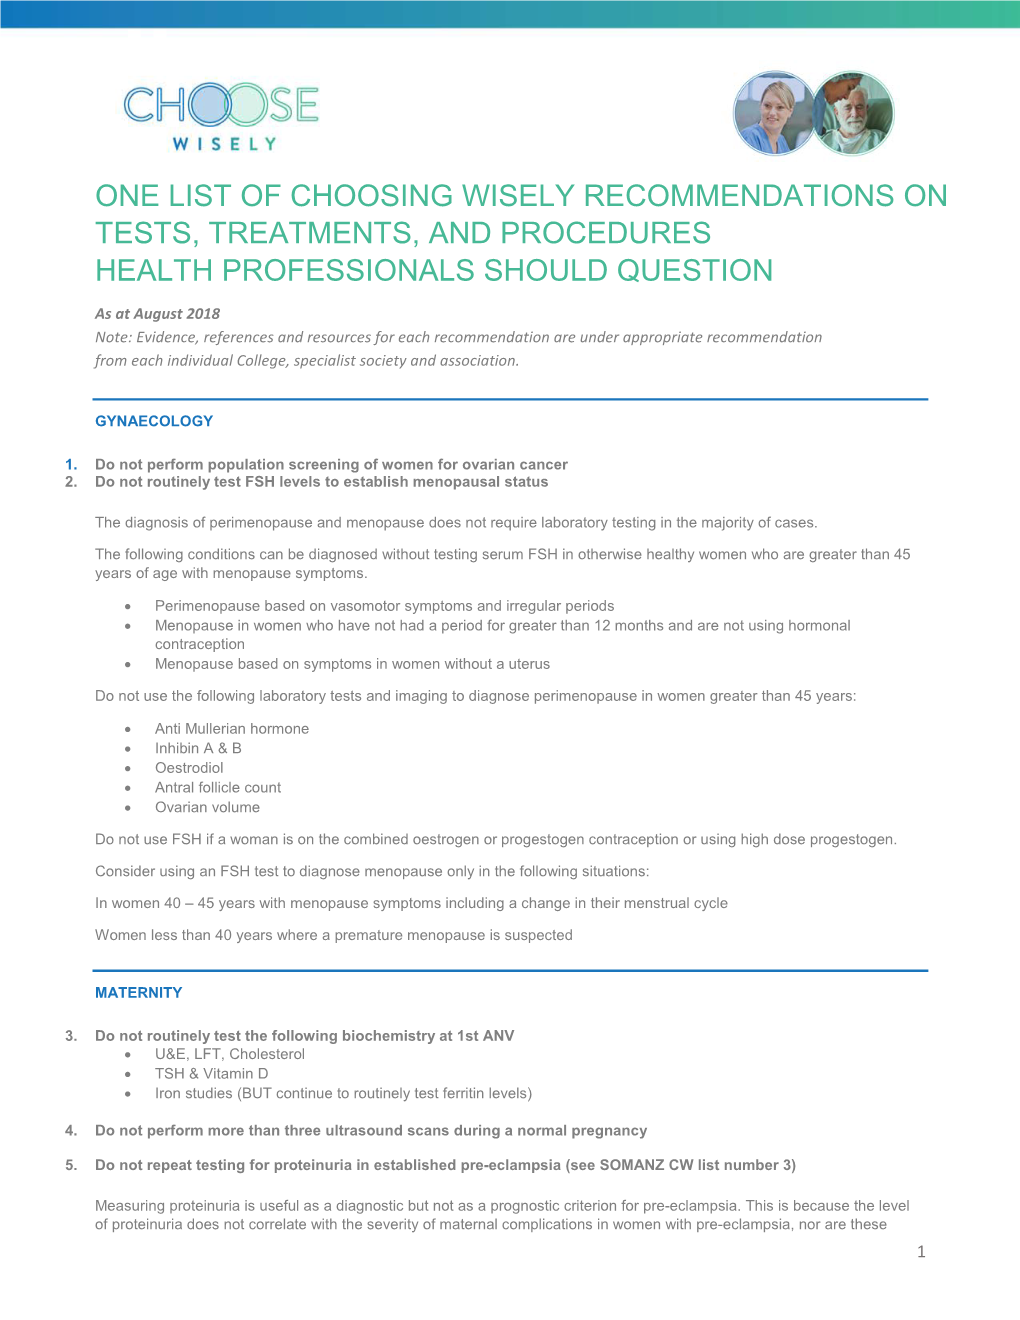 One List of Choosing Wisely Recommendations on Tests, Treatments, and Procedures Health Professionals Should Question